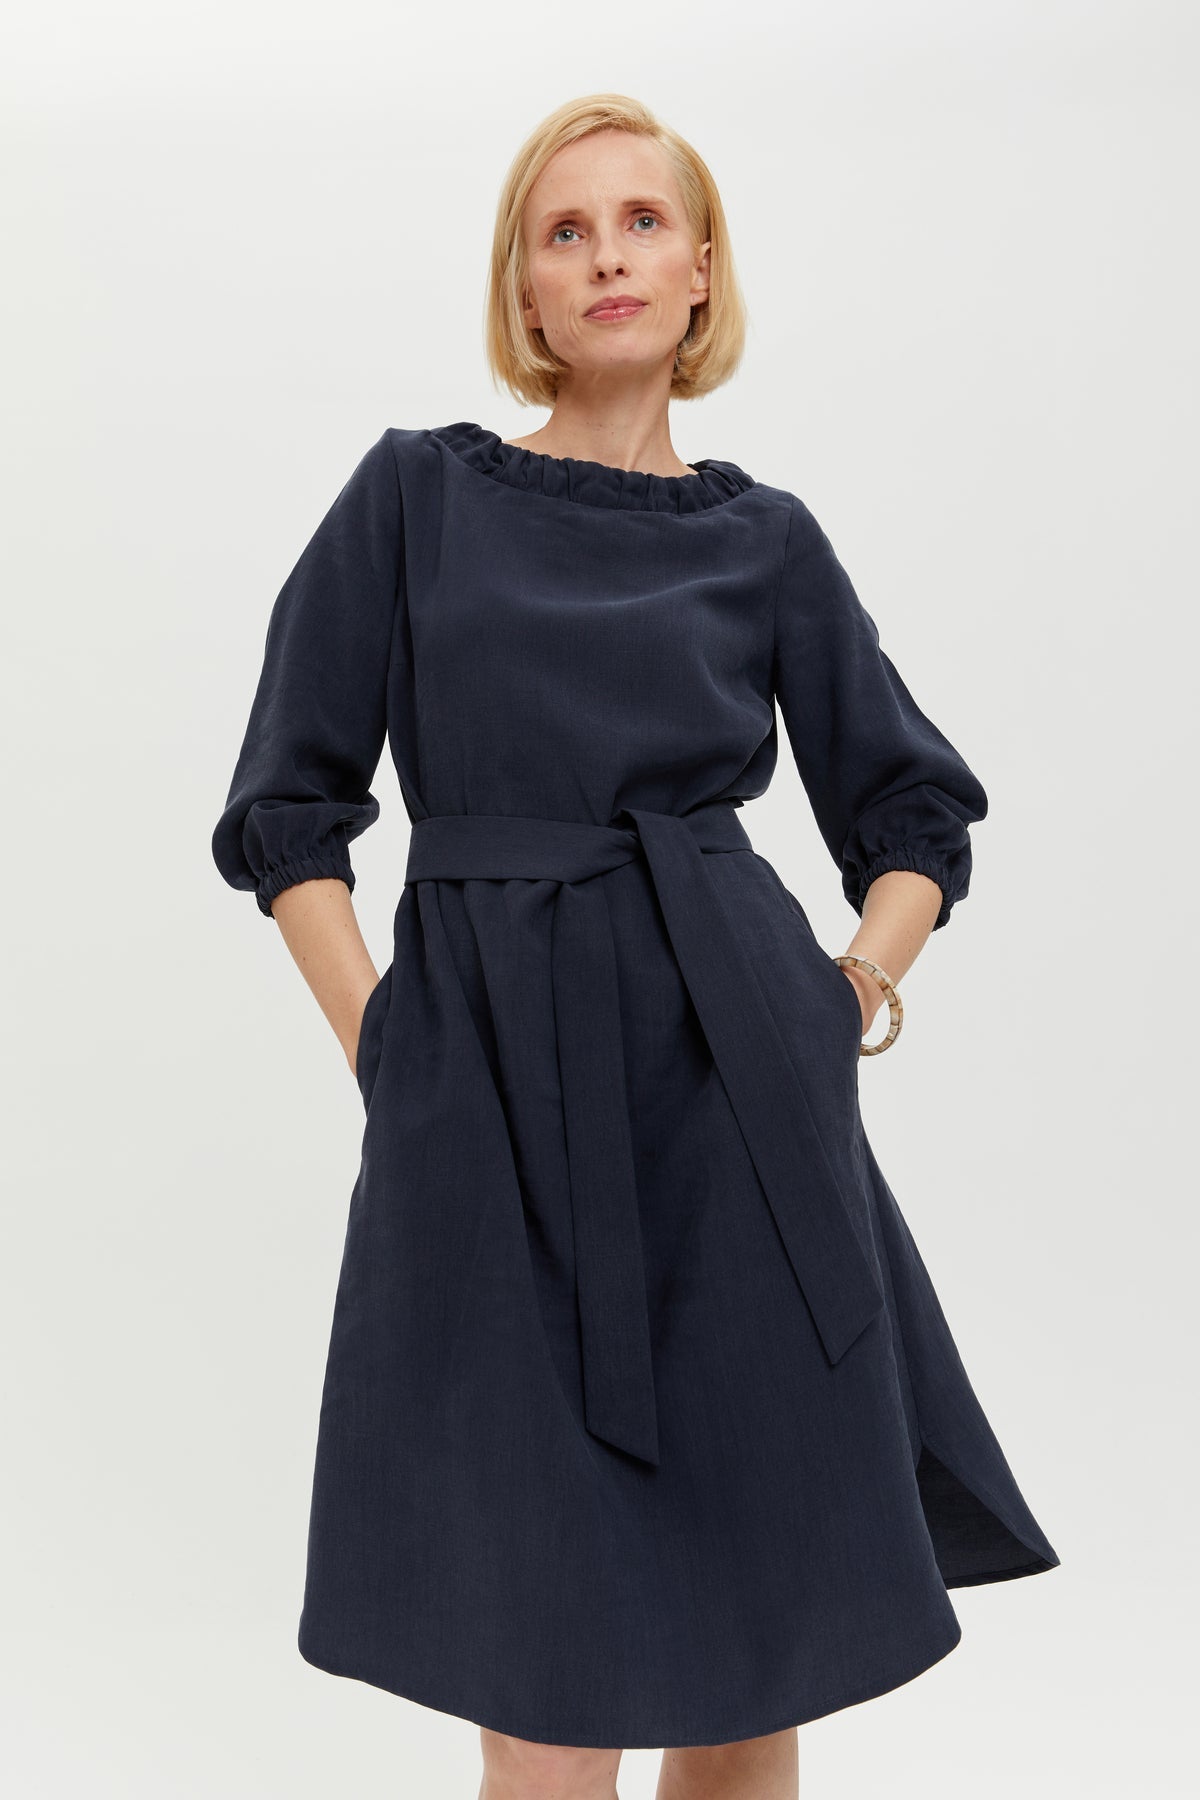 Celine | Elegant belted dress with cutout element in dark blue by Ayani